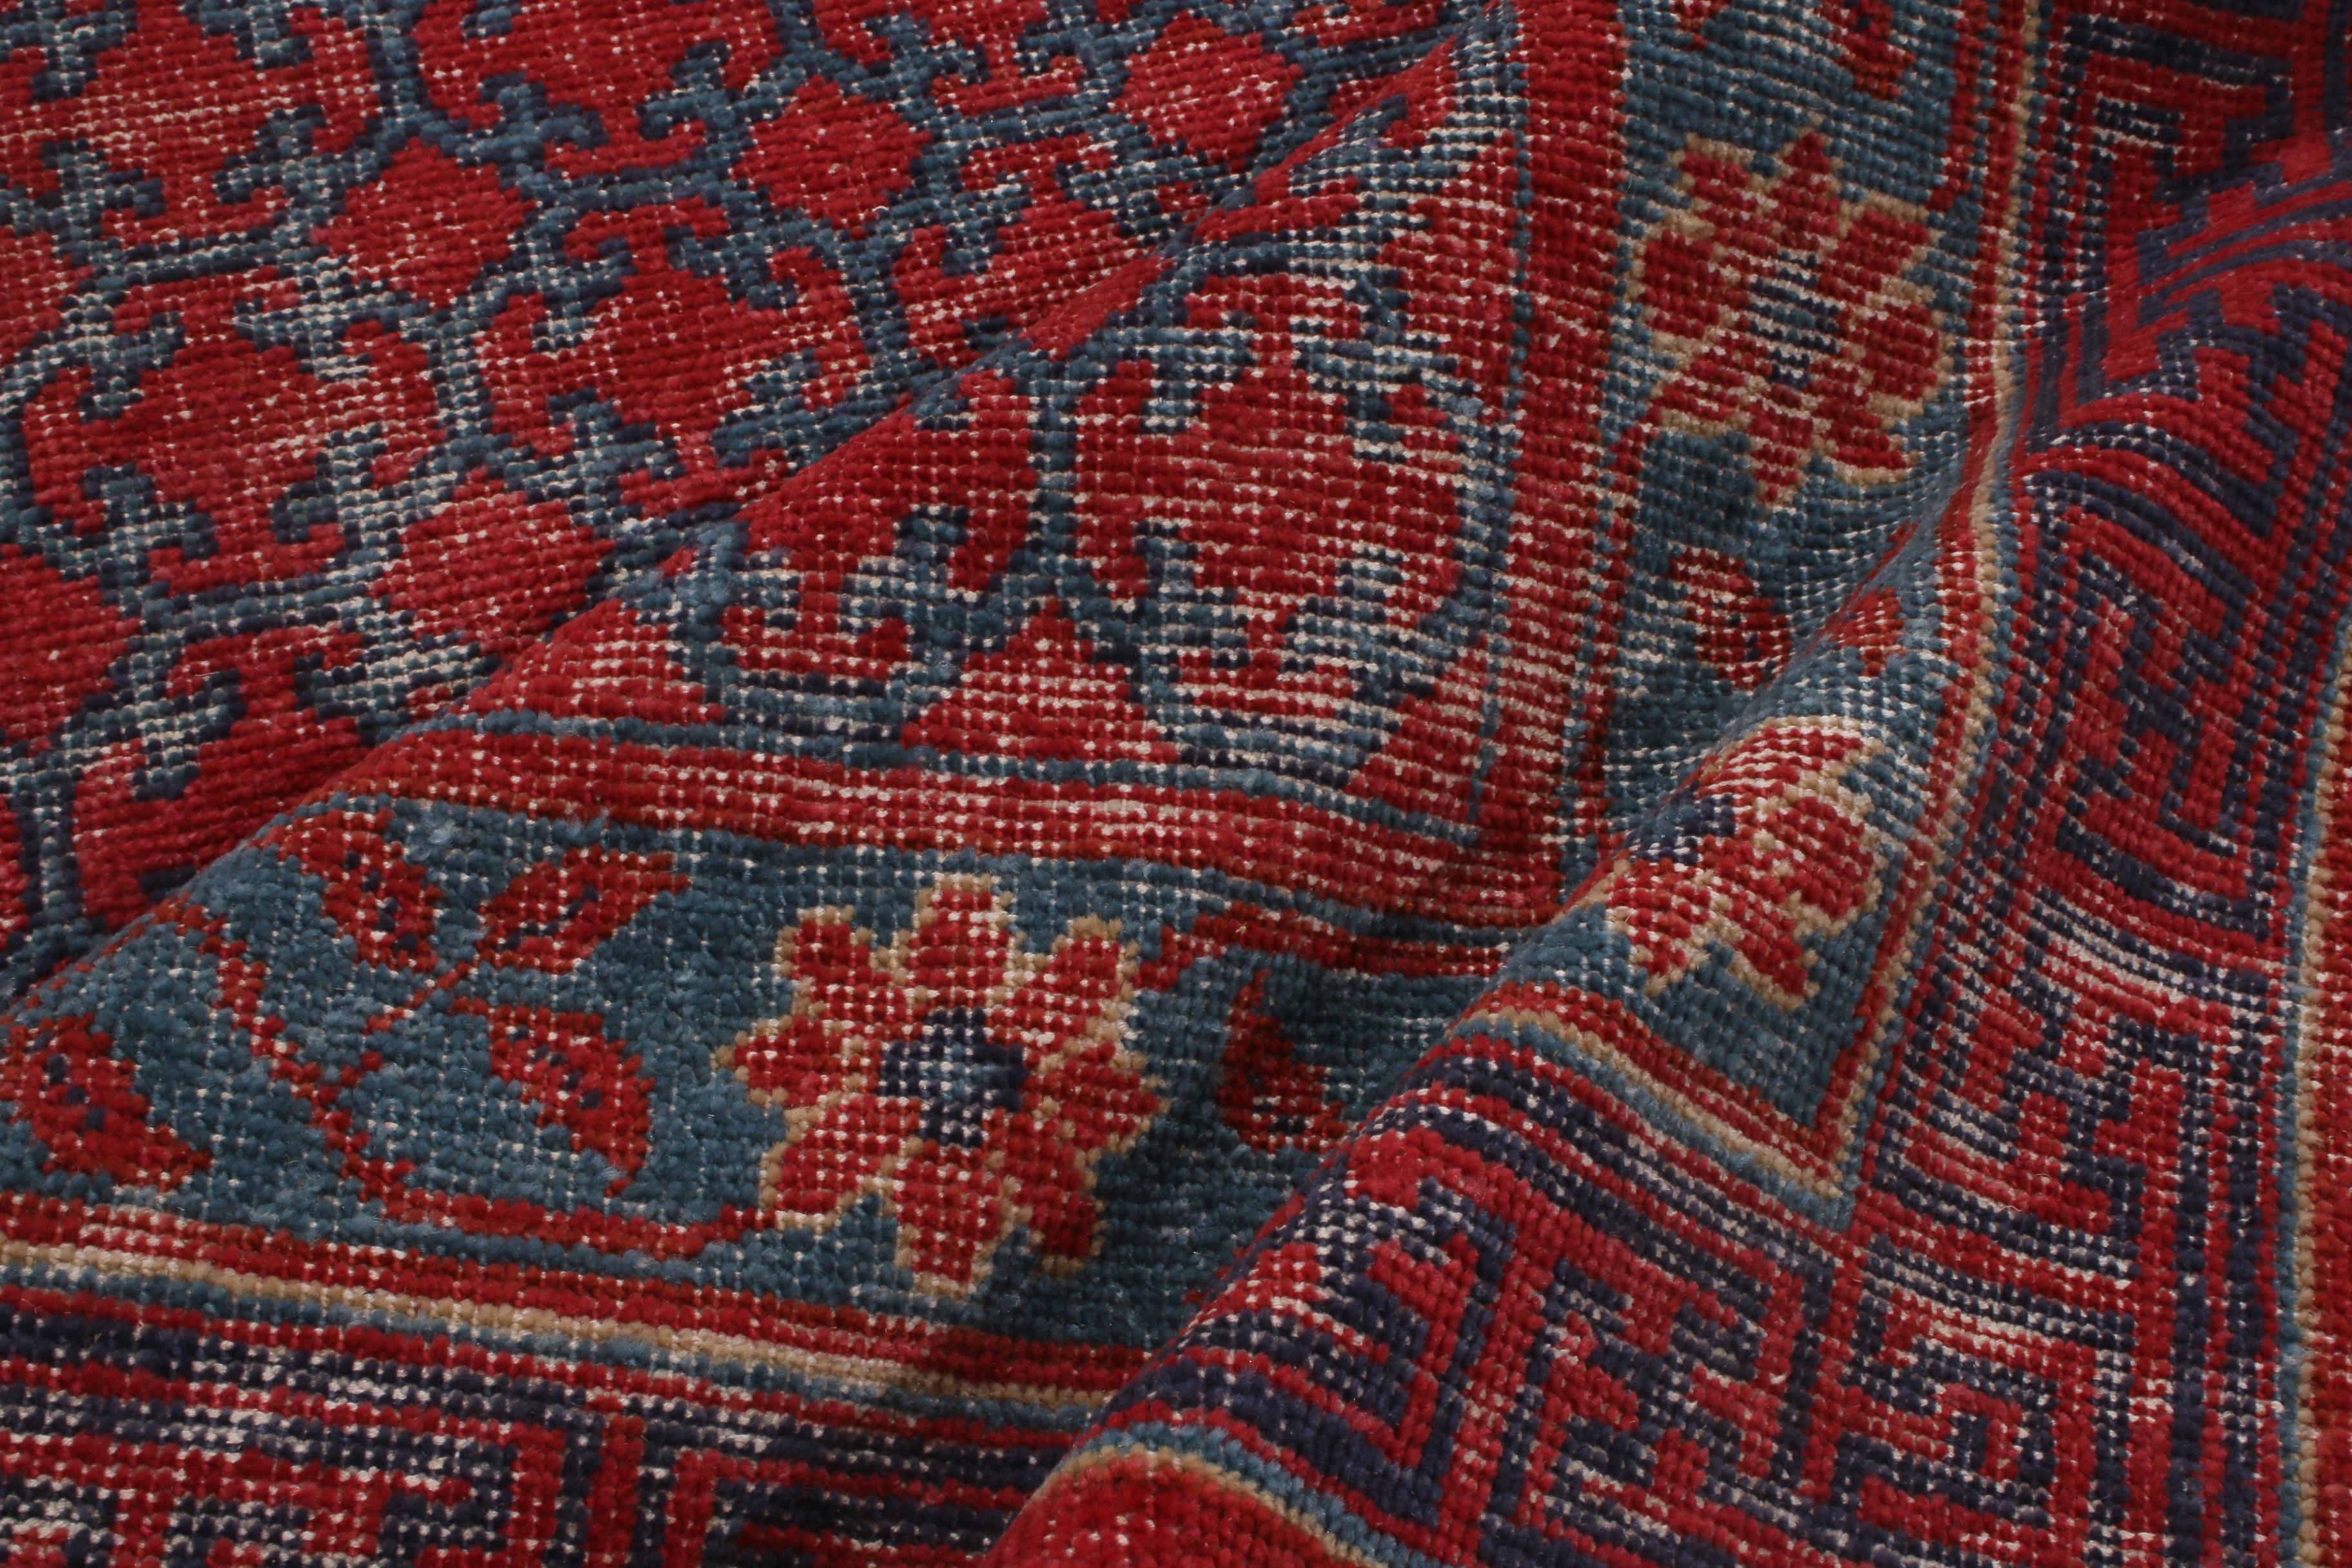 Hand-Knotted Khotan Velvet Red and Blue Wool Rug from the Homage Collection by Rug & Kilim